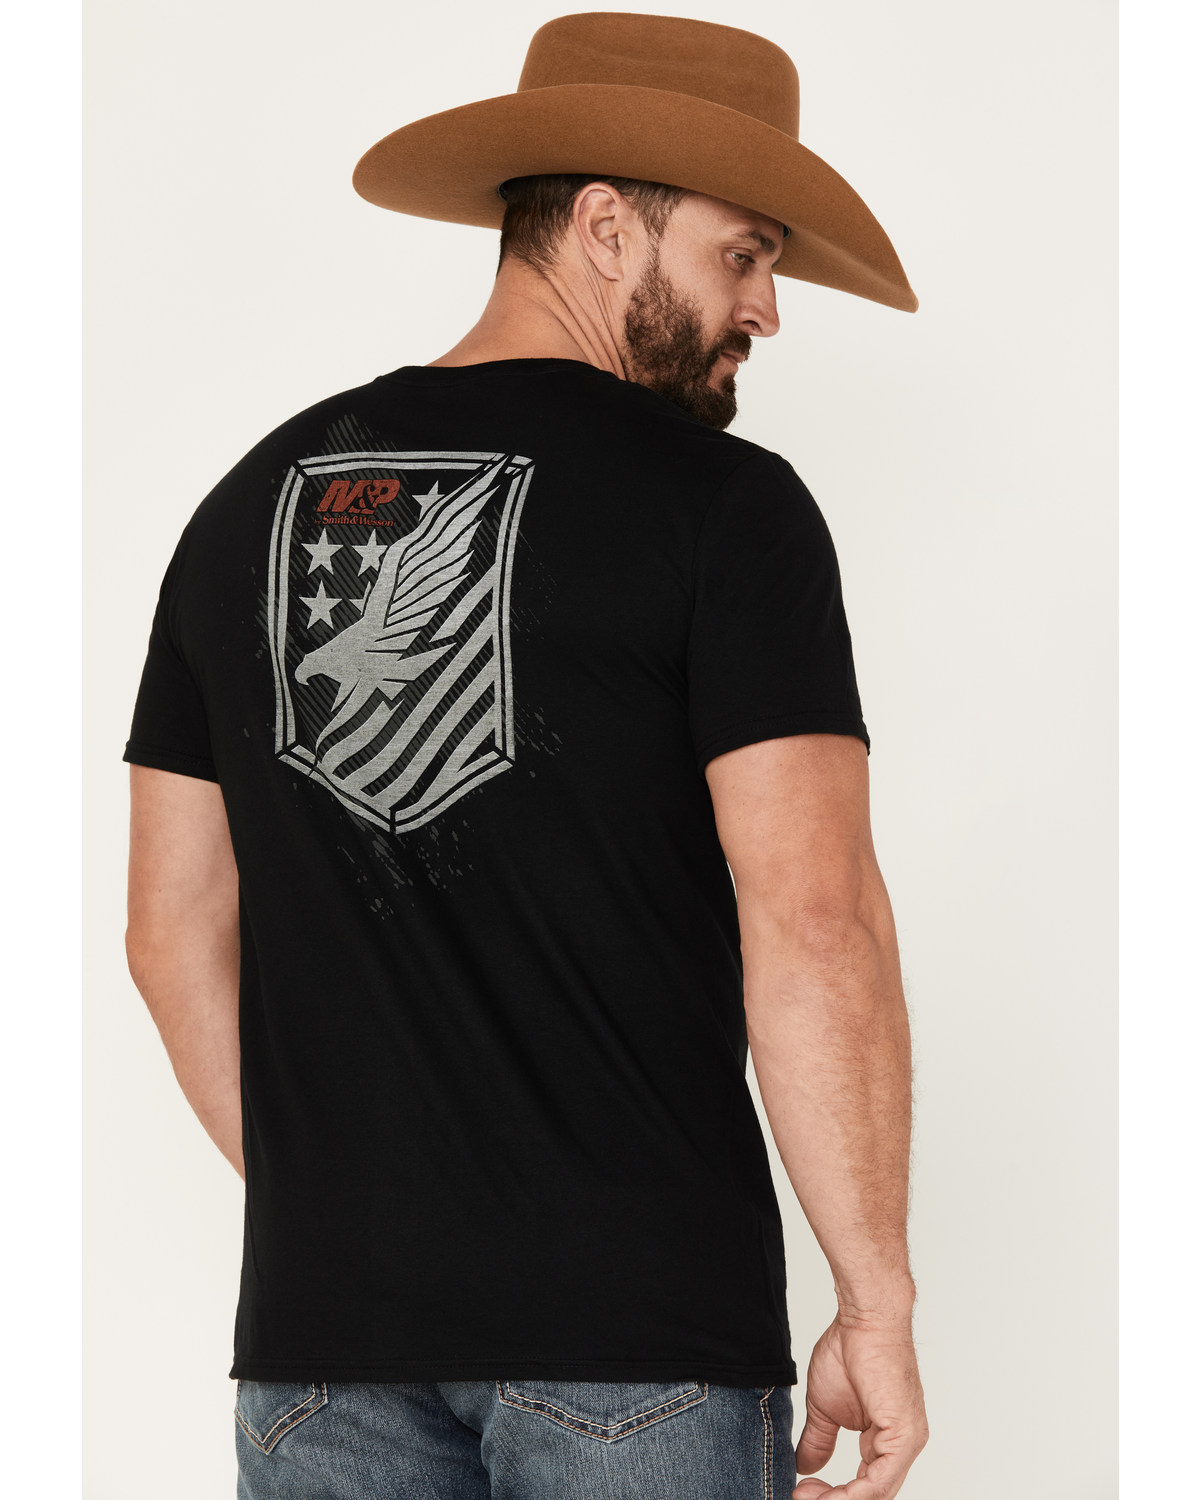 Smith & Wesson Men's M&P Eagle Shield Short Sleeve Graphic T-Shirt